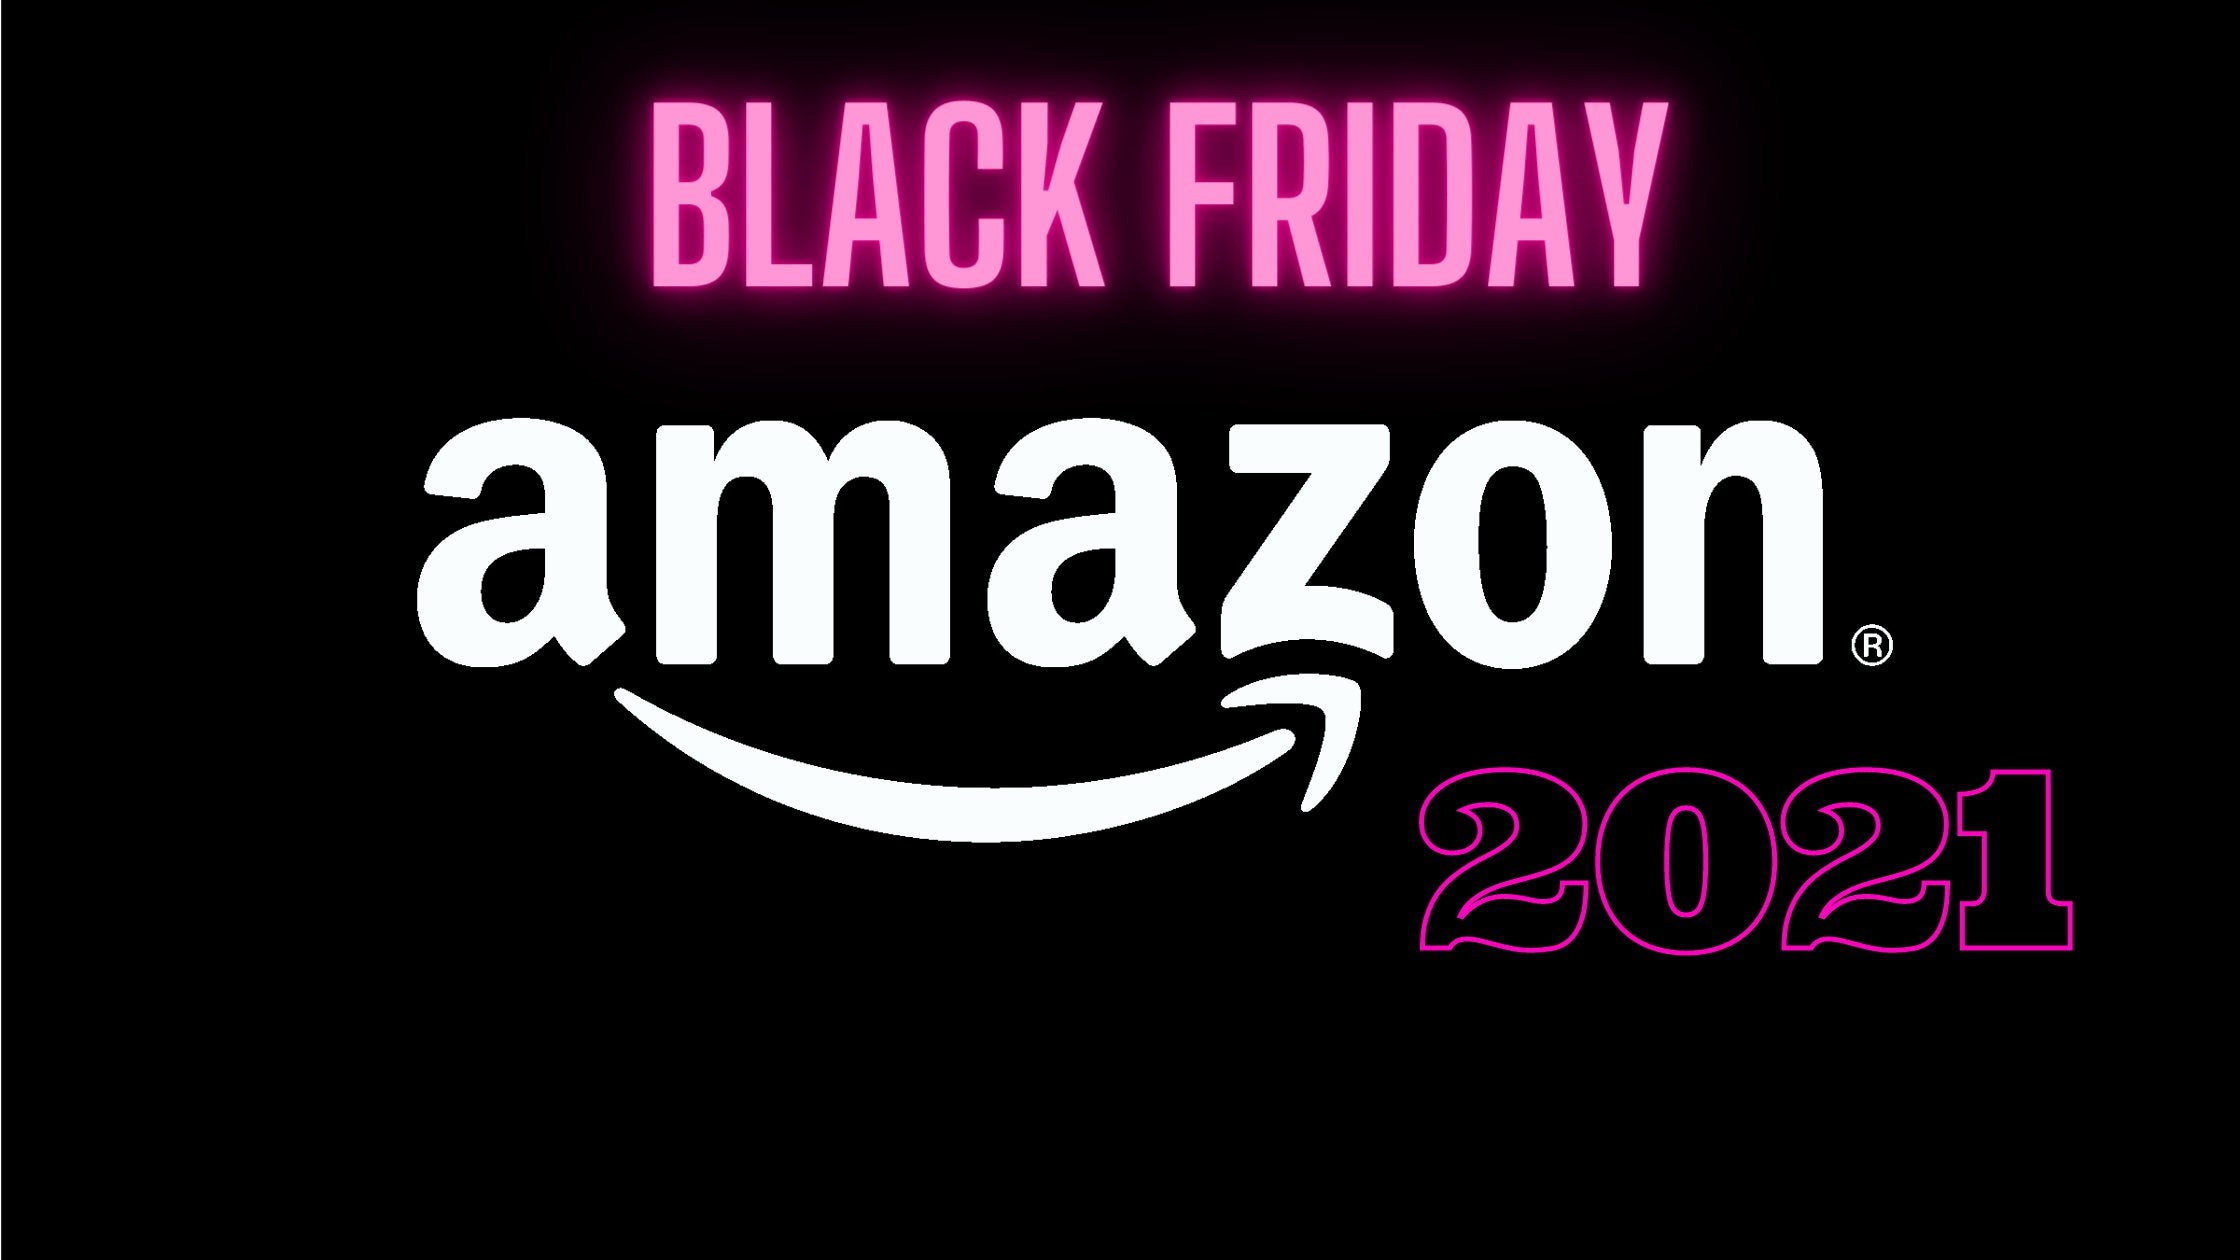 Turn this year's BLACK Friday into PINK Friday